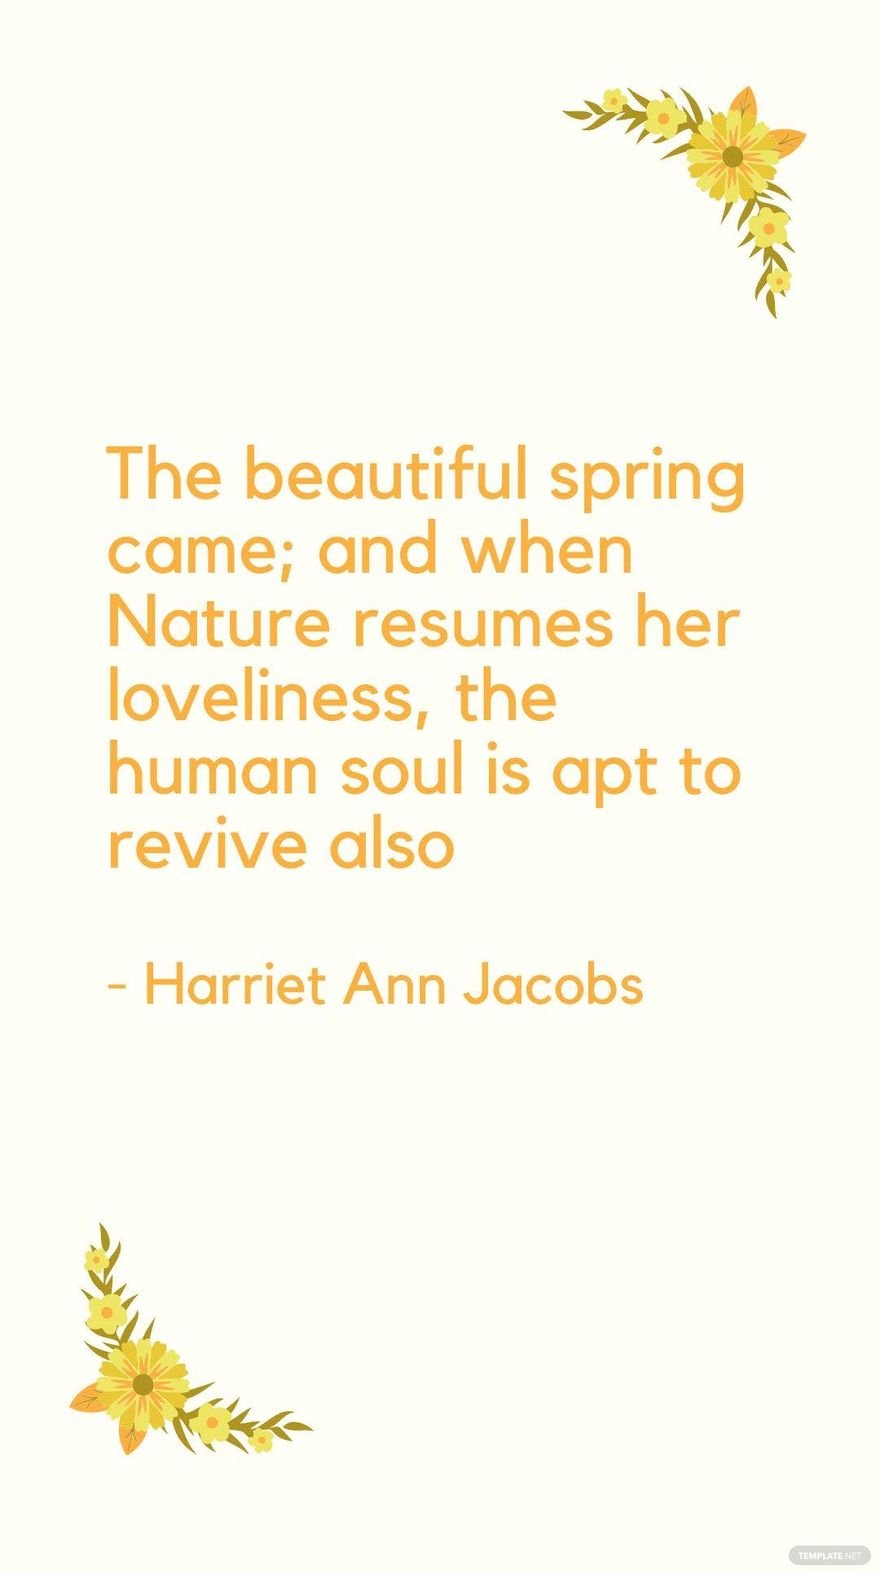 Free Harriet Ann Jacobs - The beautiful spring came; and when Nature resumes her loveliness, the human soul is apt to revive also